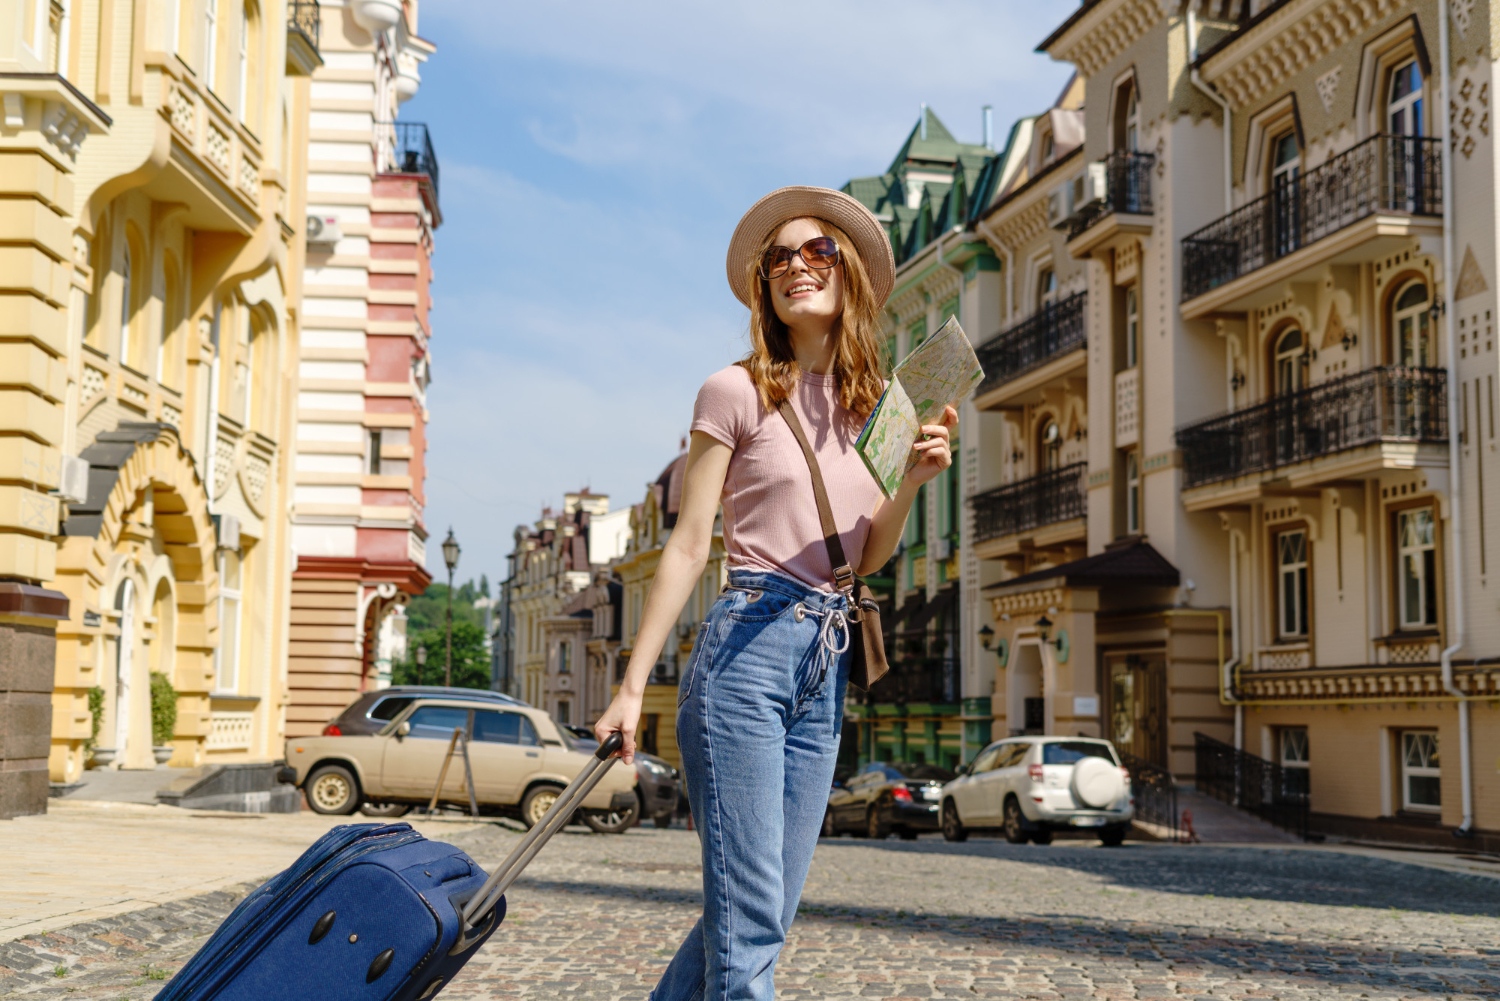 beautiful-young-woman-tourist-pleasant-with-city-map-suitcase-city-center